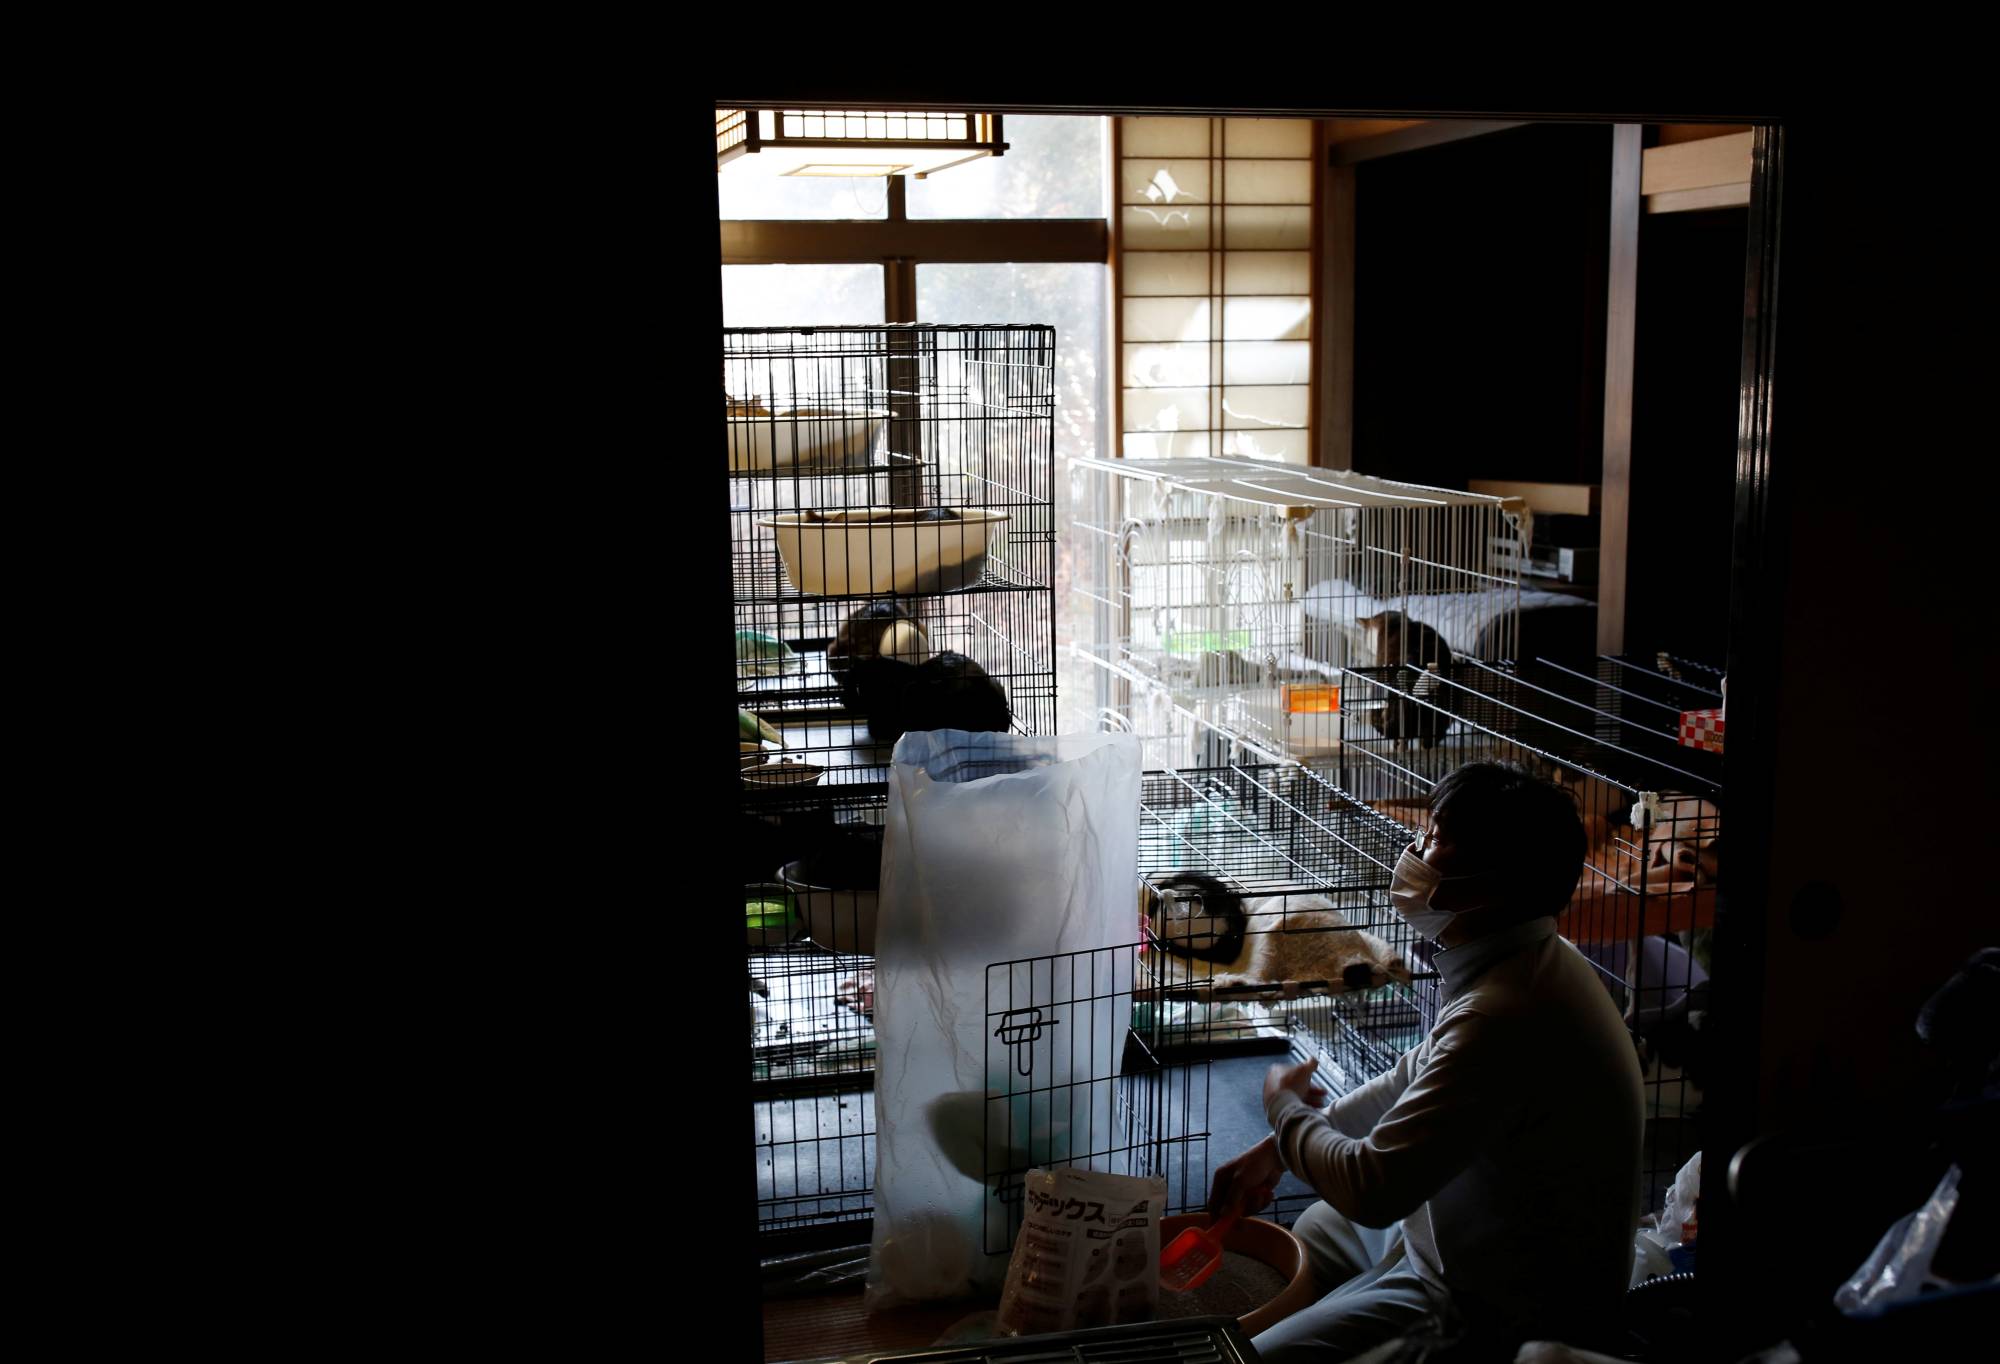 Kato cleans one of the many cages in this two-story home. | REUTERS